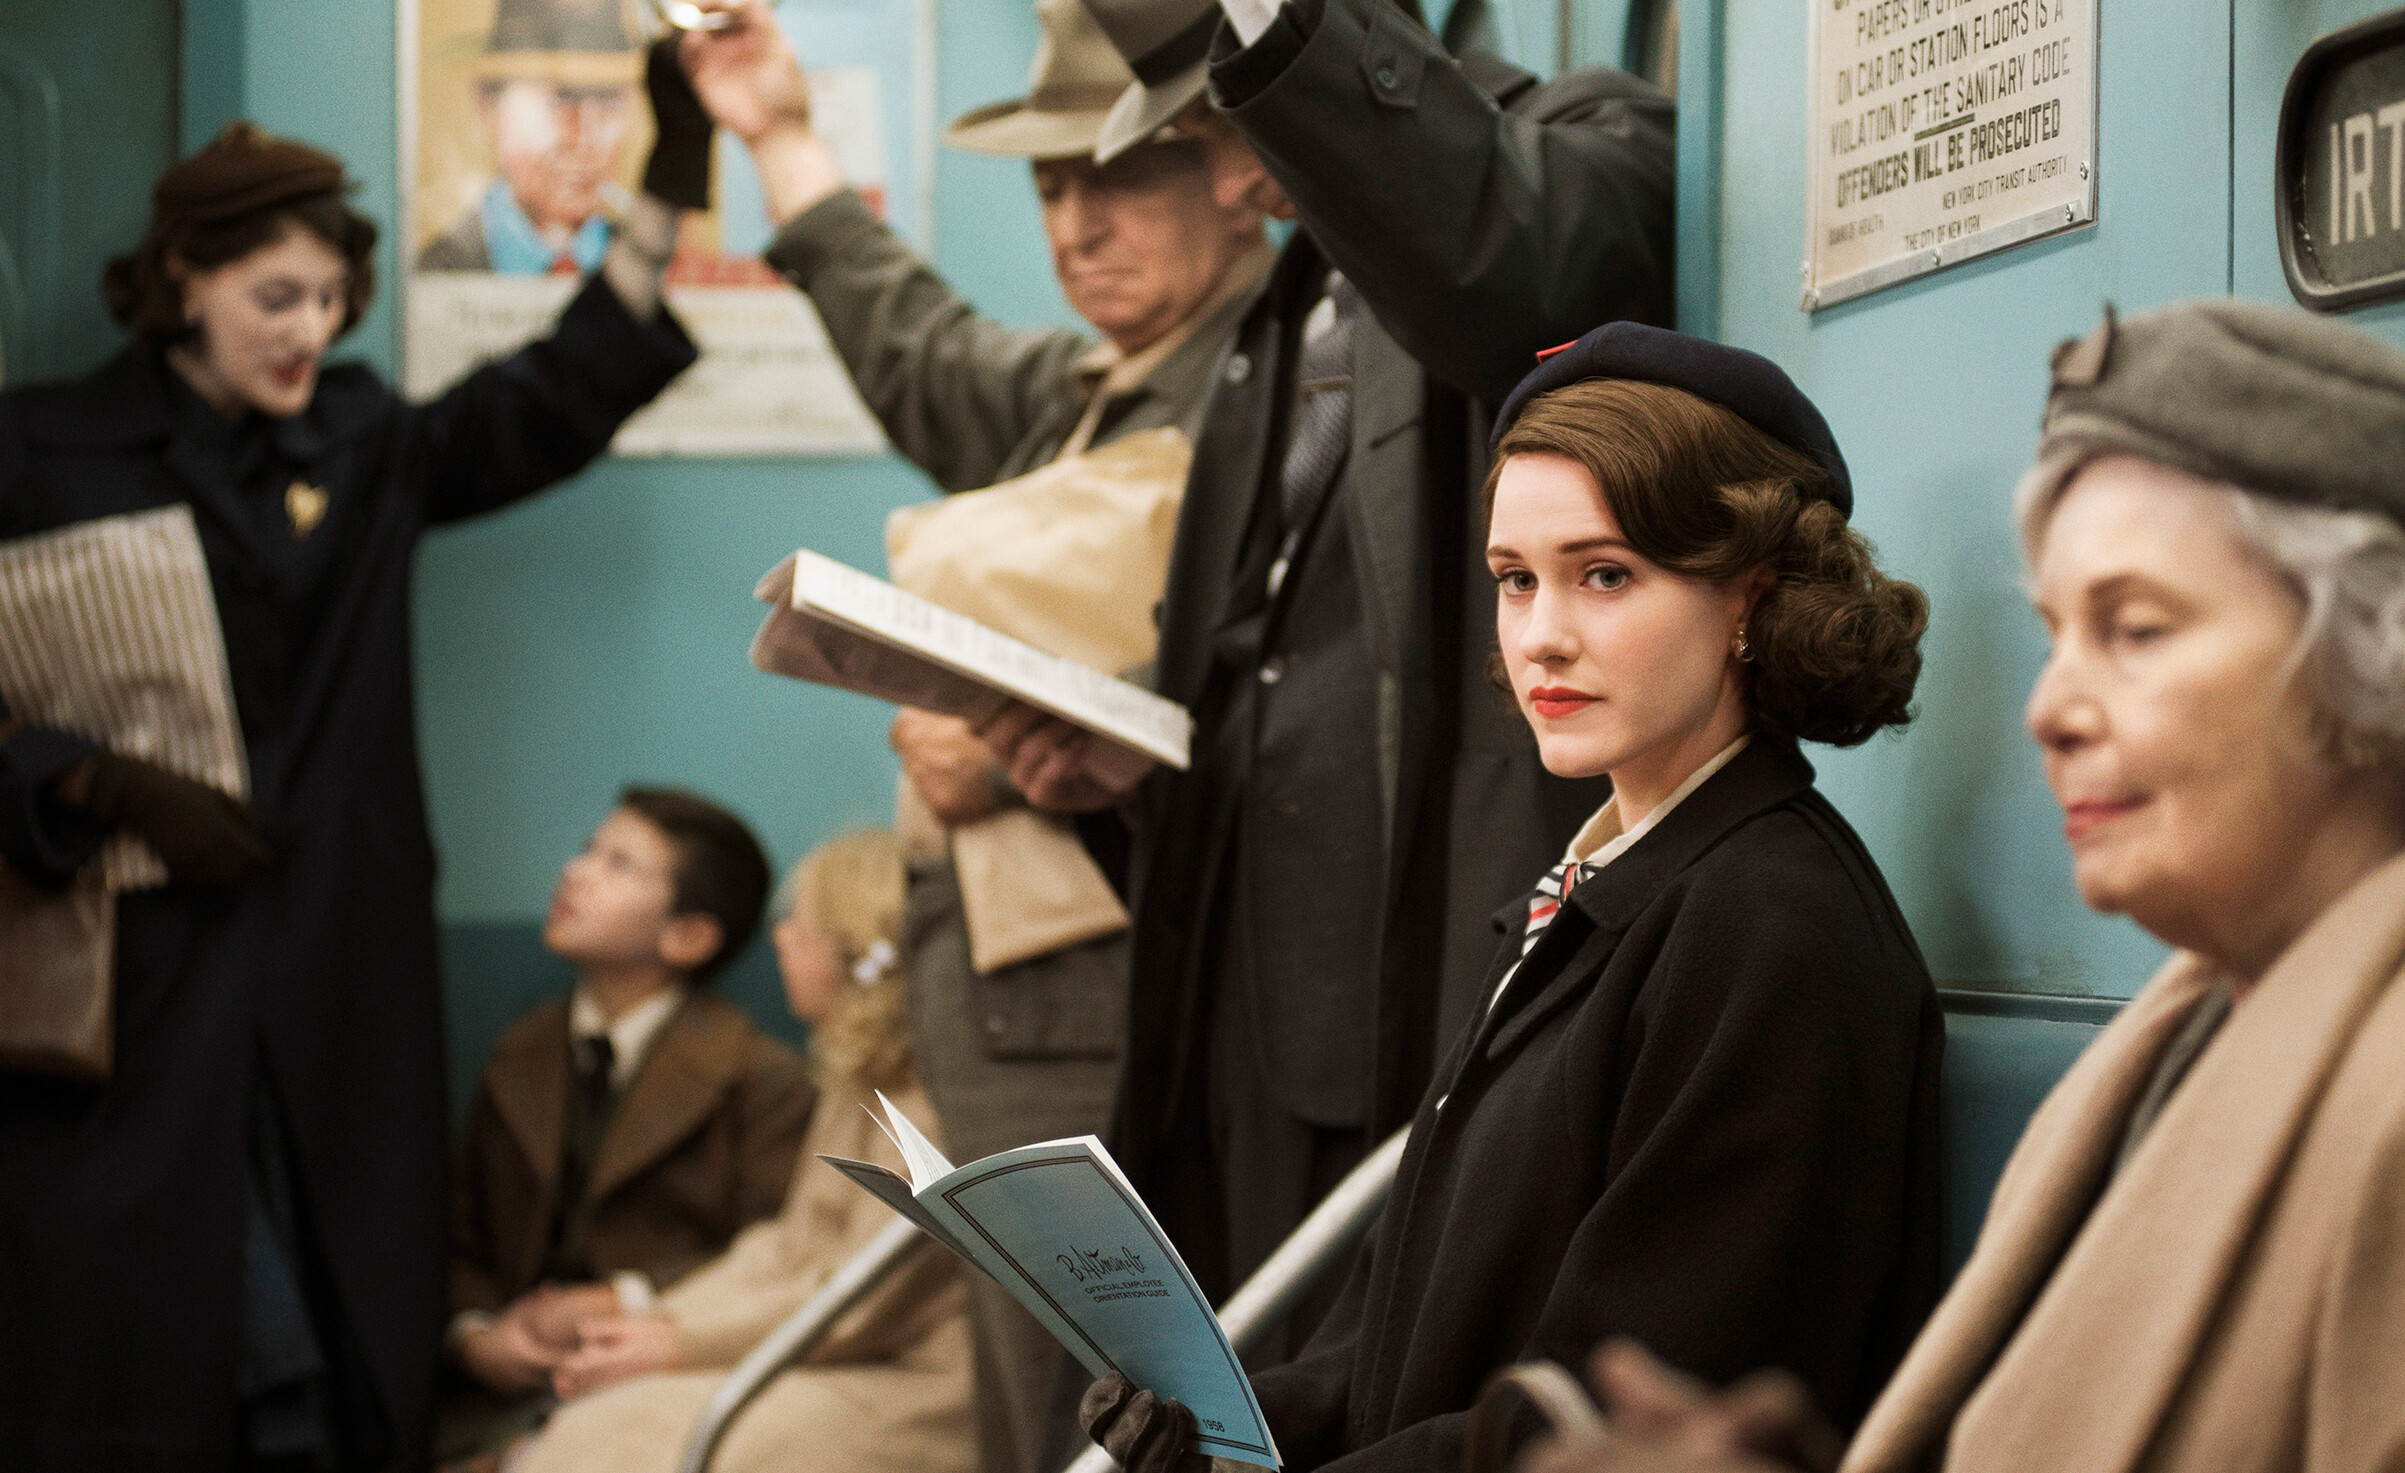 The Marvelous Mrs. Maisel: The series won the Golden Globe Award for Best Television Series – Musical or Comedy in 2017. 2410x1480 HD Wallpaper.